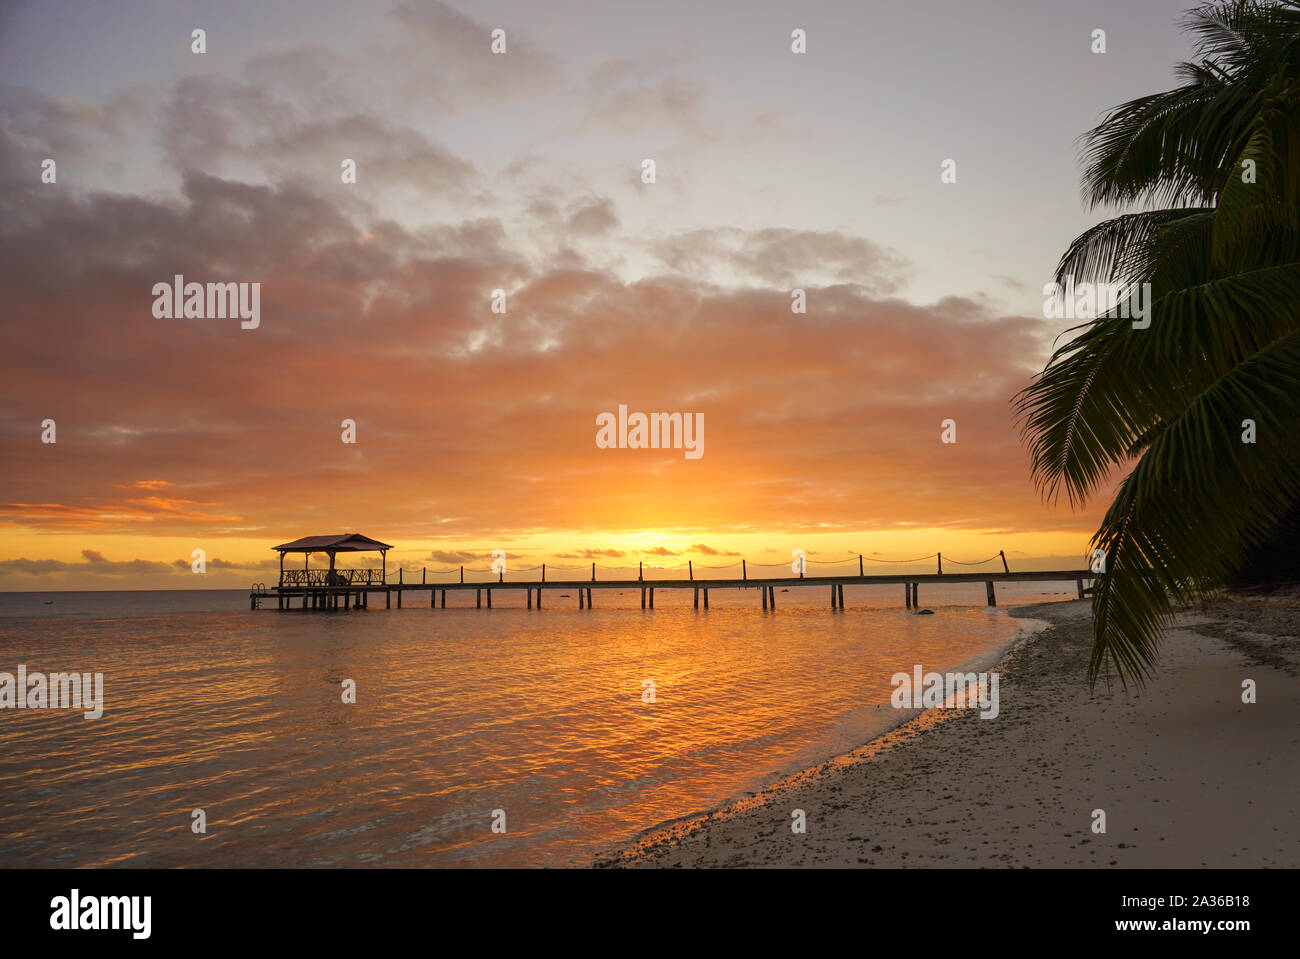 View of a dock leading out into water framed by palm trees on the tropical island of Fakarava in French Polynesia Stock Photo